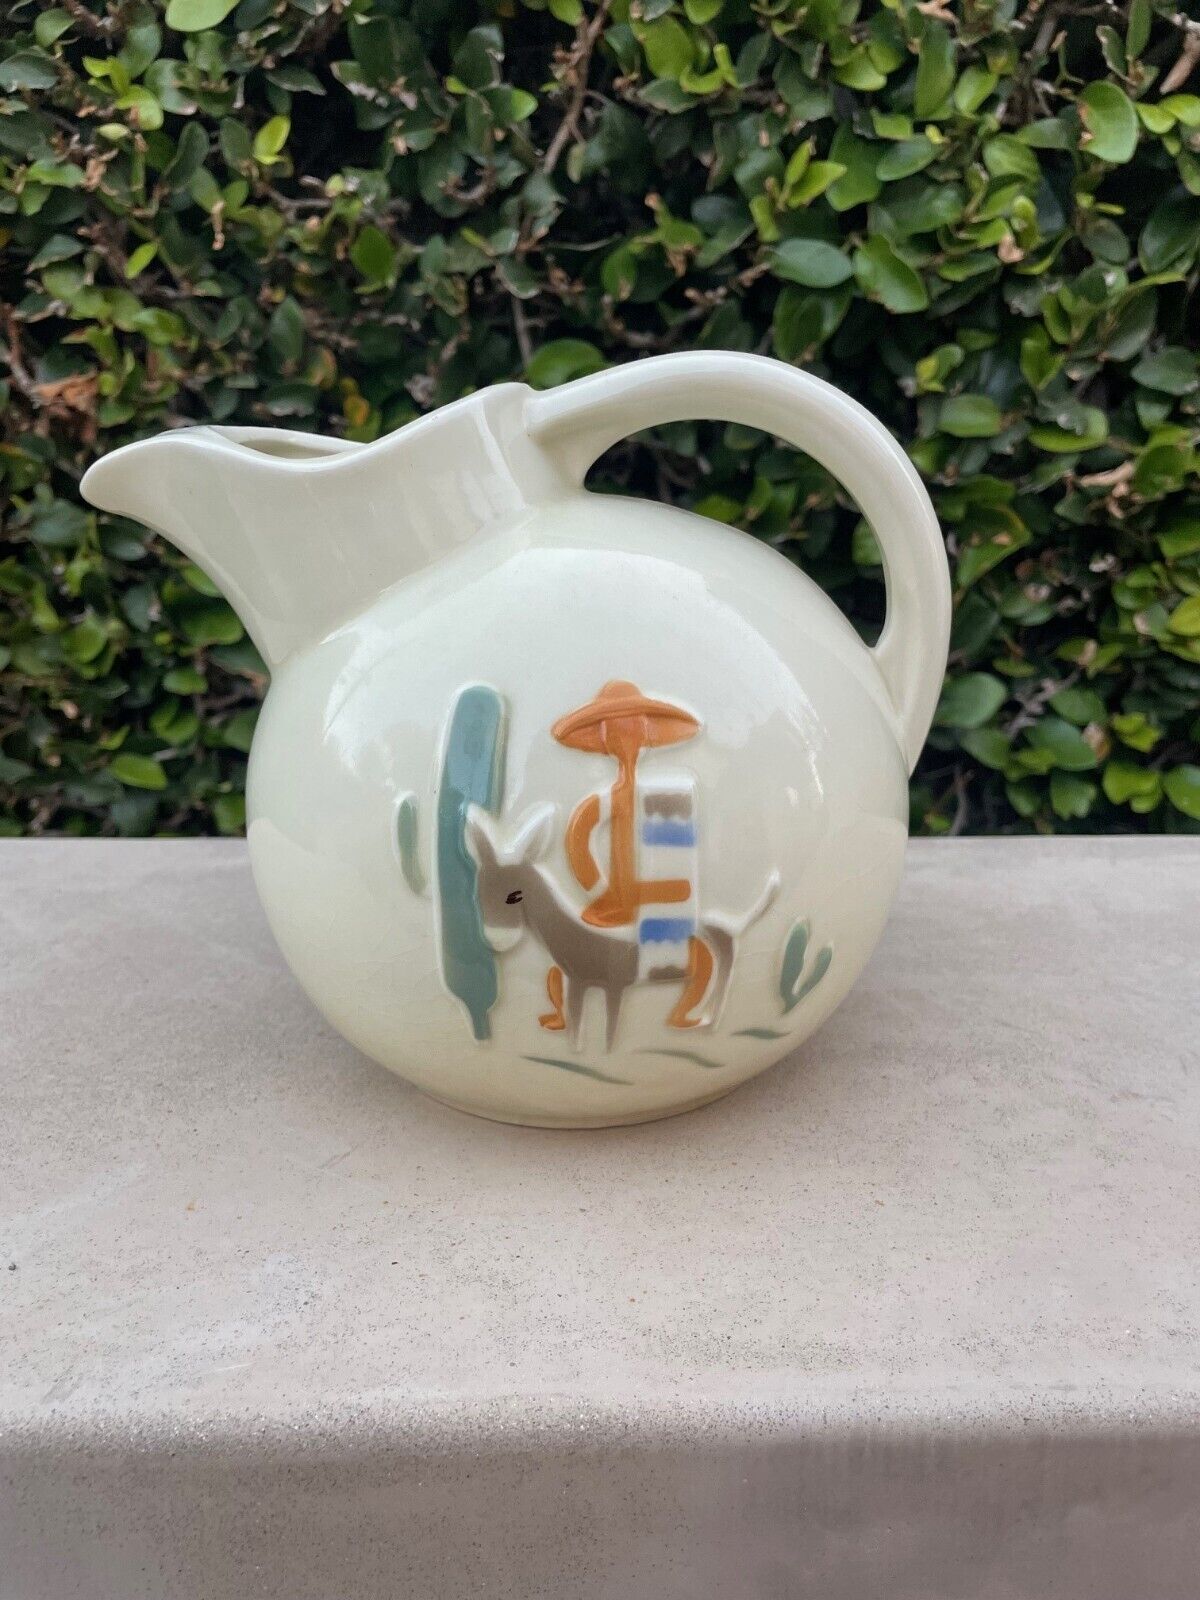 Vintage Porcelier Ball Pitcher with a Mexican theme